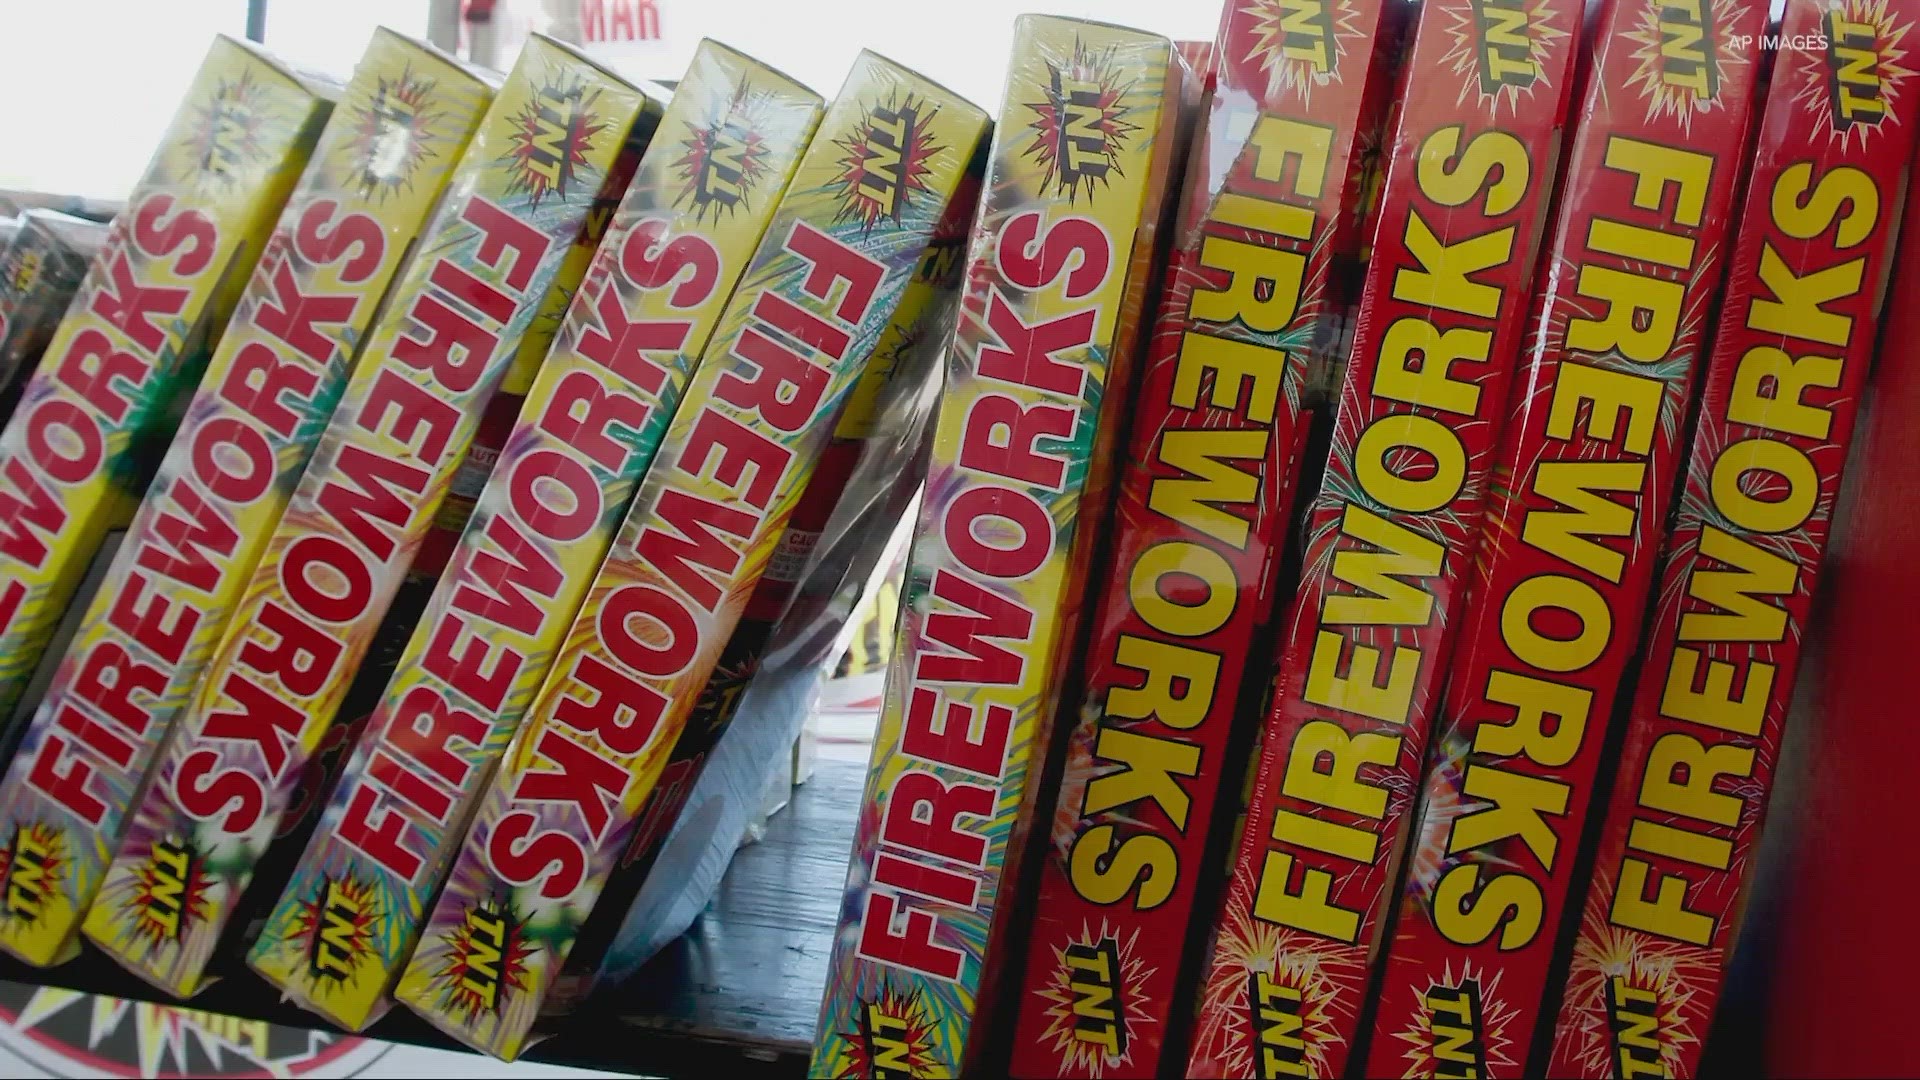 The Verify team takes a look at whether fireworks have an expiration date and when it's not safe to use old fireworks.